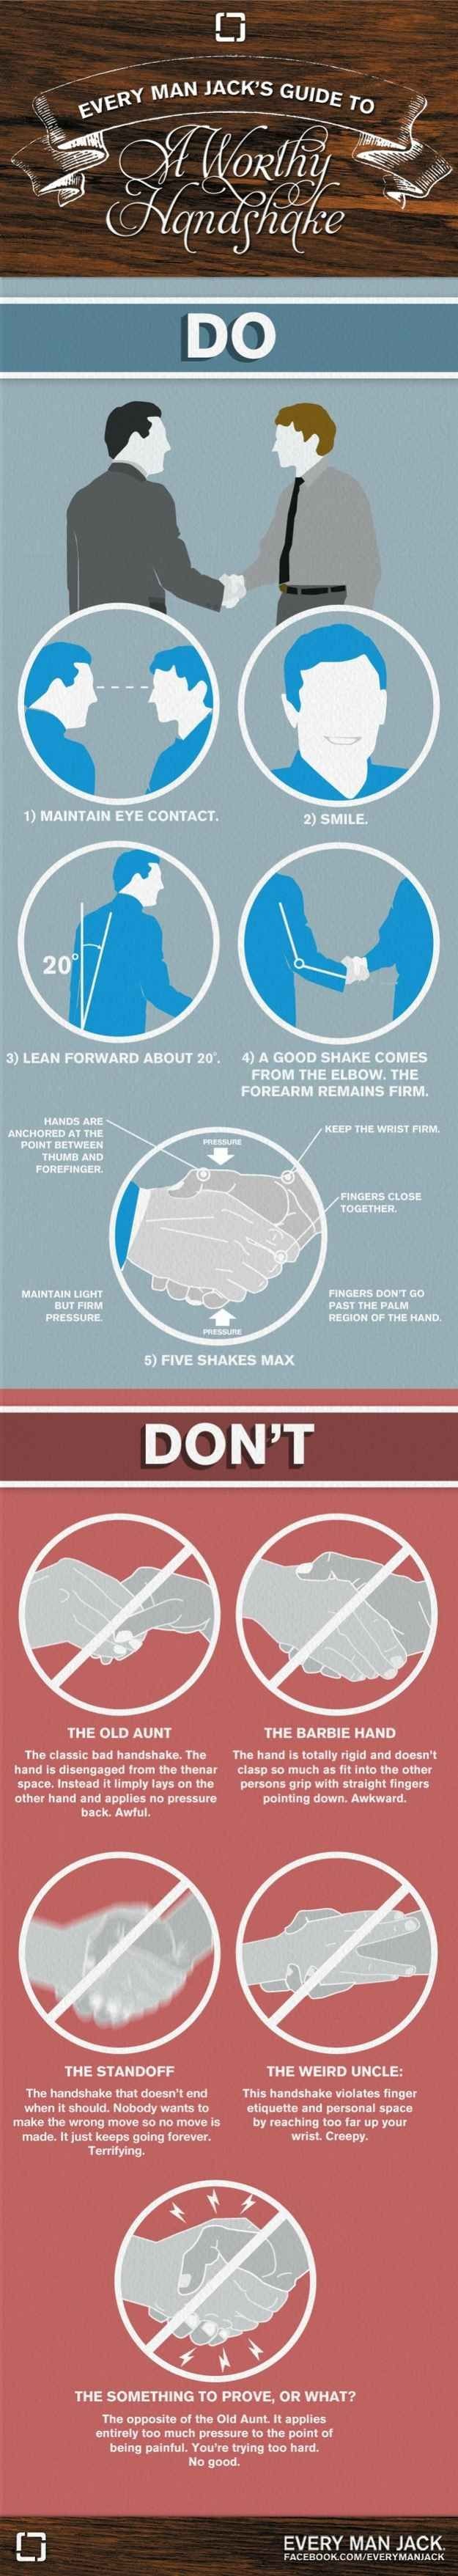 The Dos and Don'ts of giving a handshake. | 36 Ess...